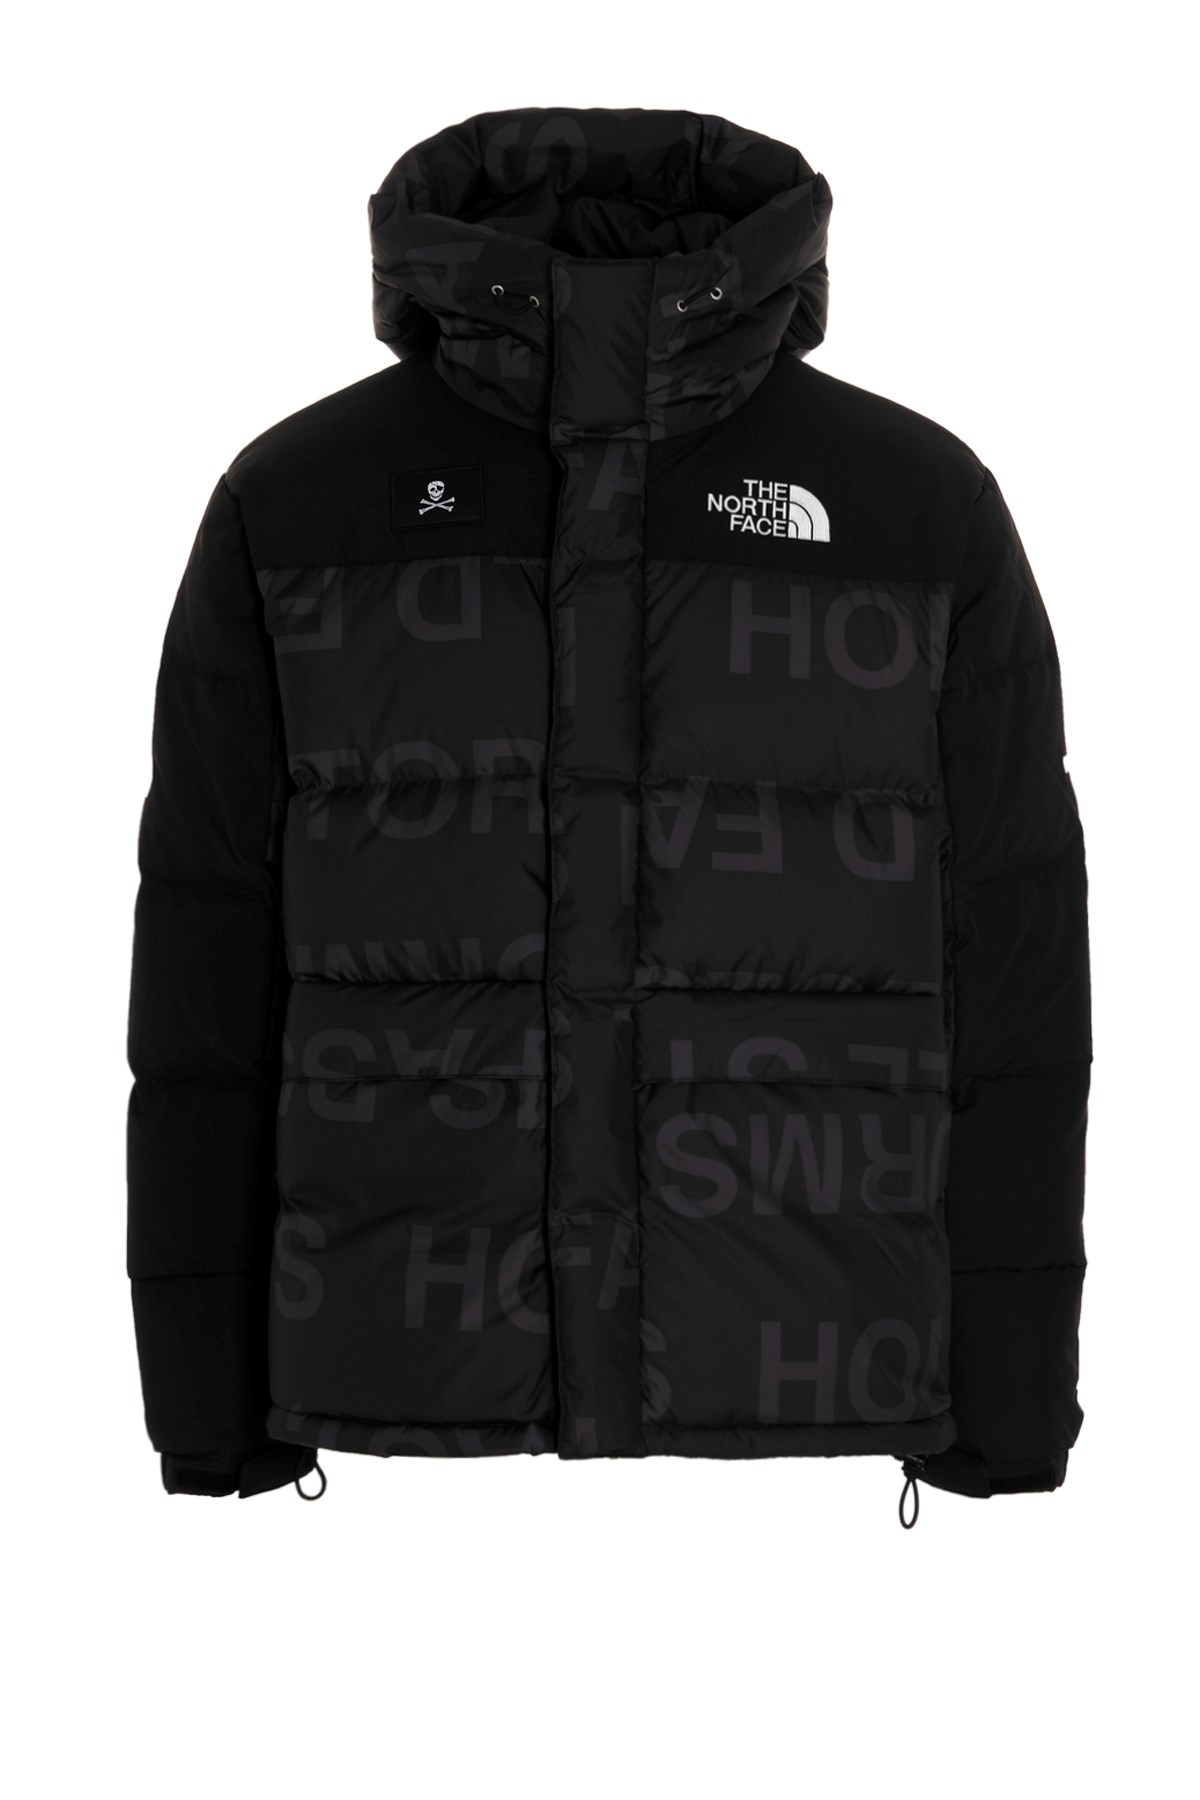 THE NORTH FACE The North Face Conrads Capsule Down Jacket